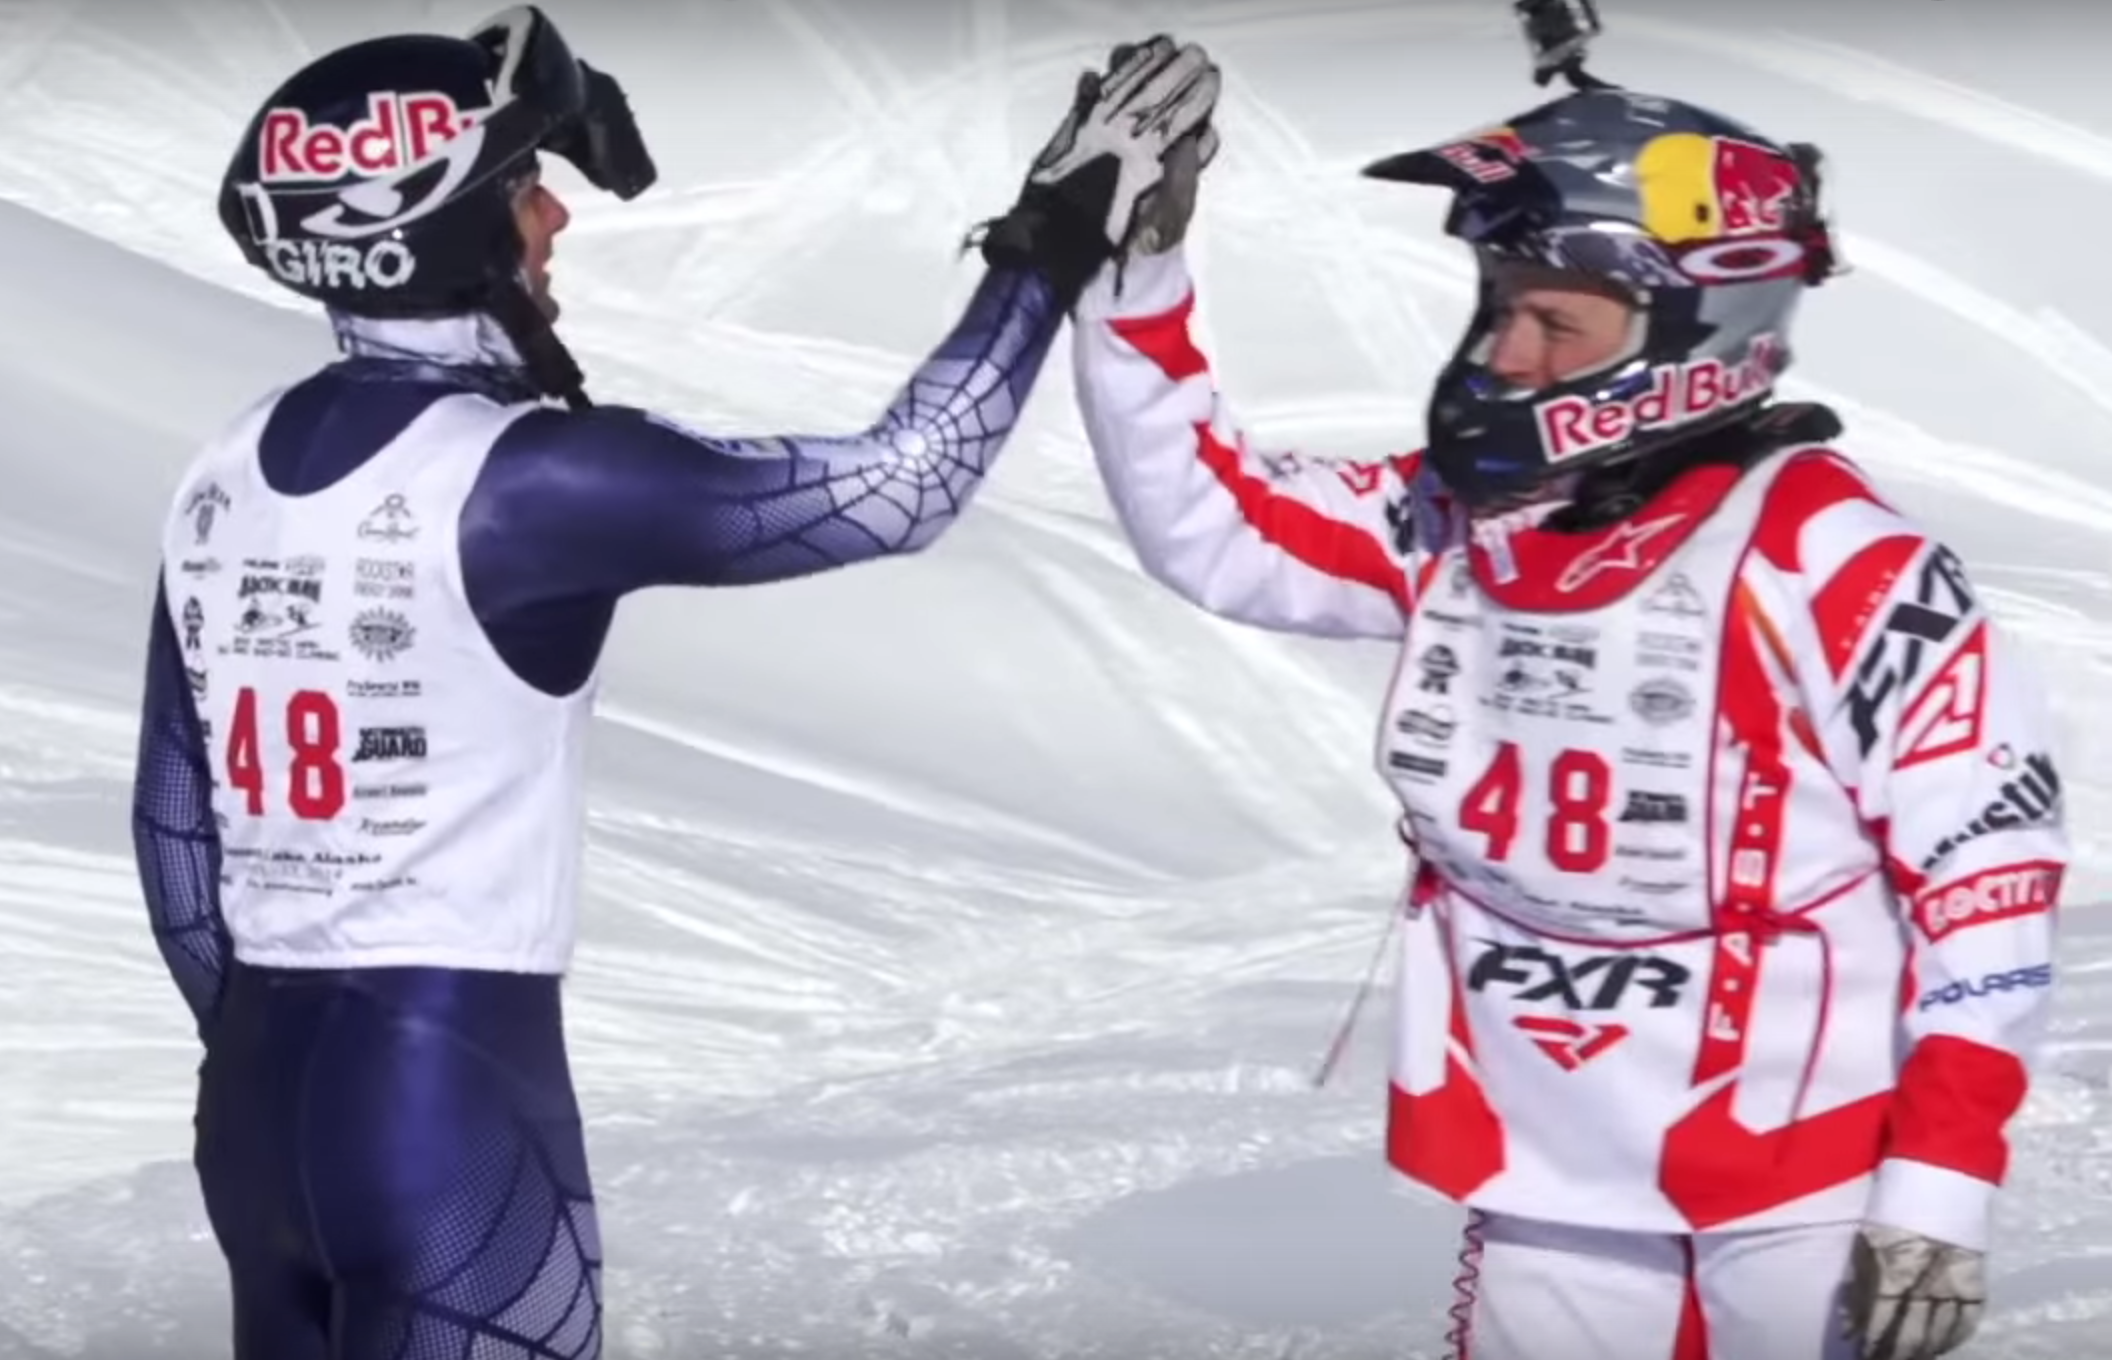 Olympic Skier Daron Rahlves And X Game Winner Levi Lavallee Pull In 61 000 With Artic Man Win